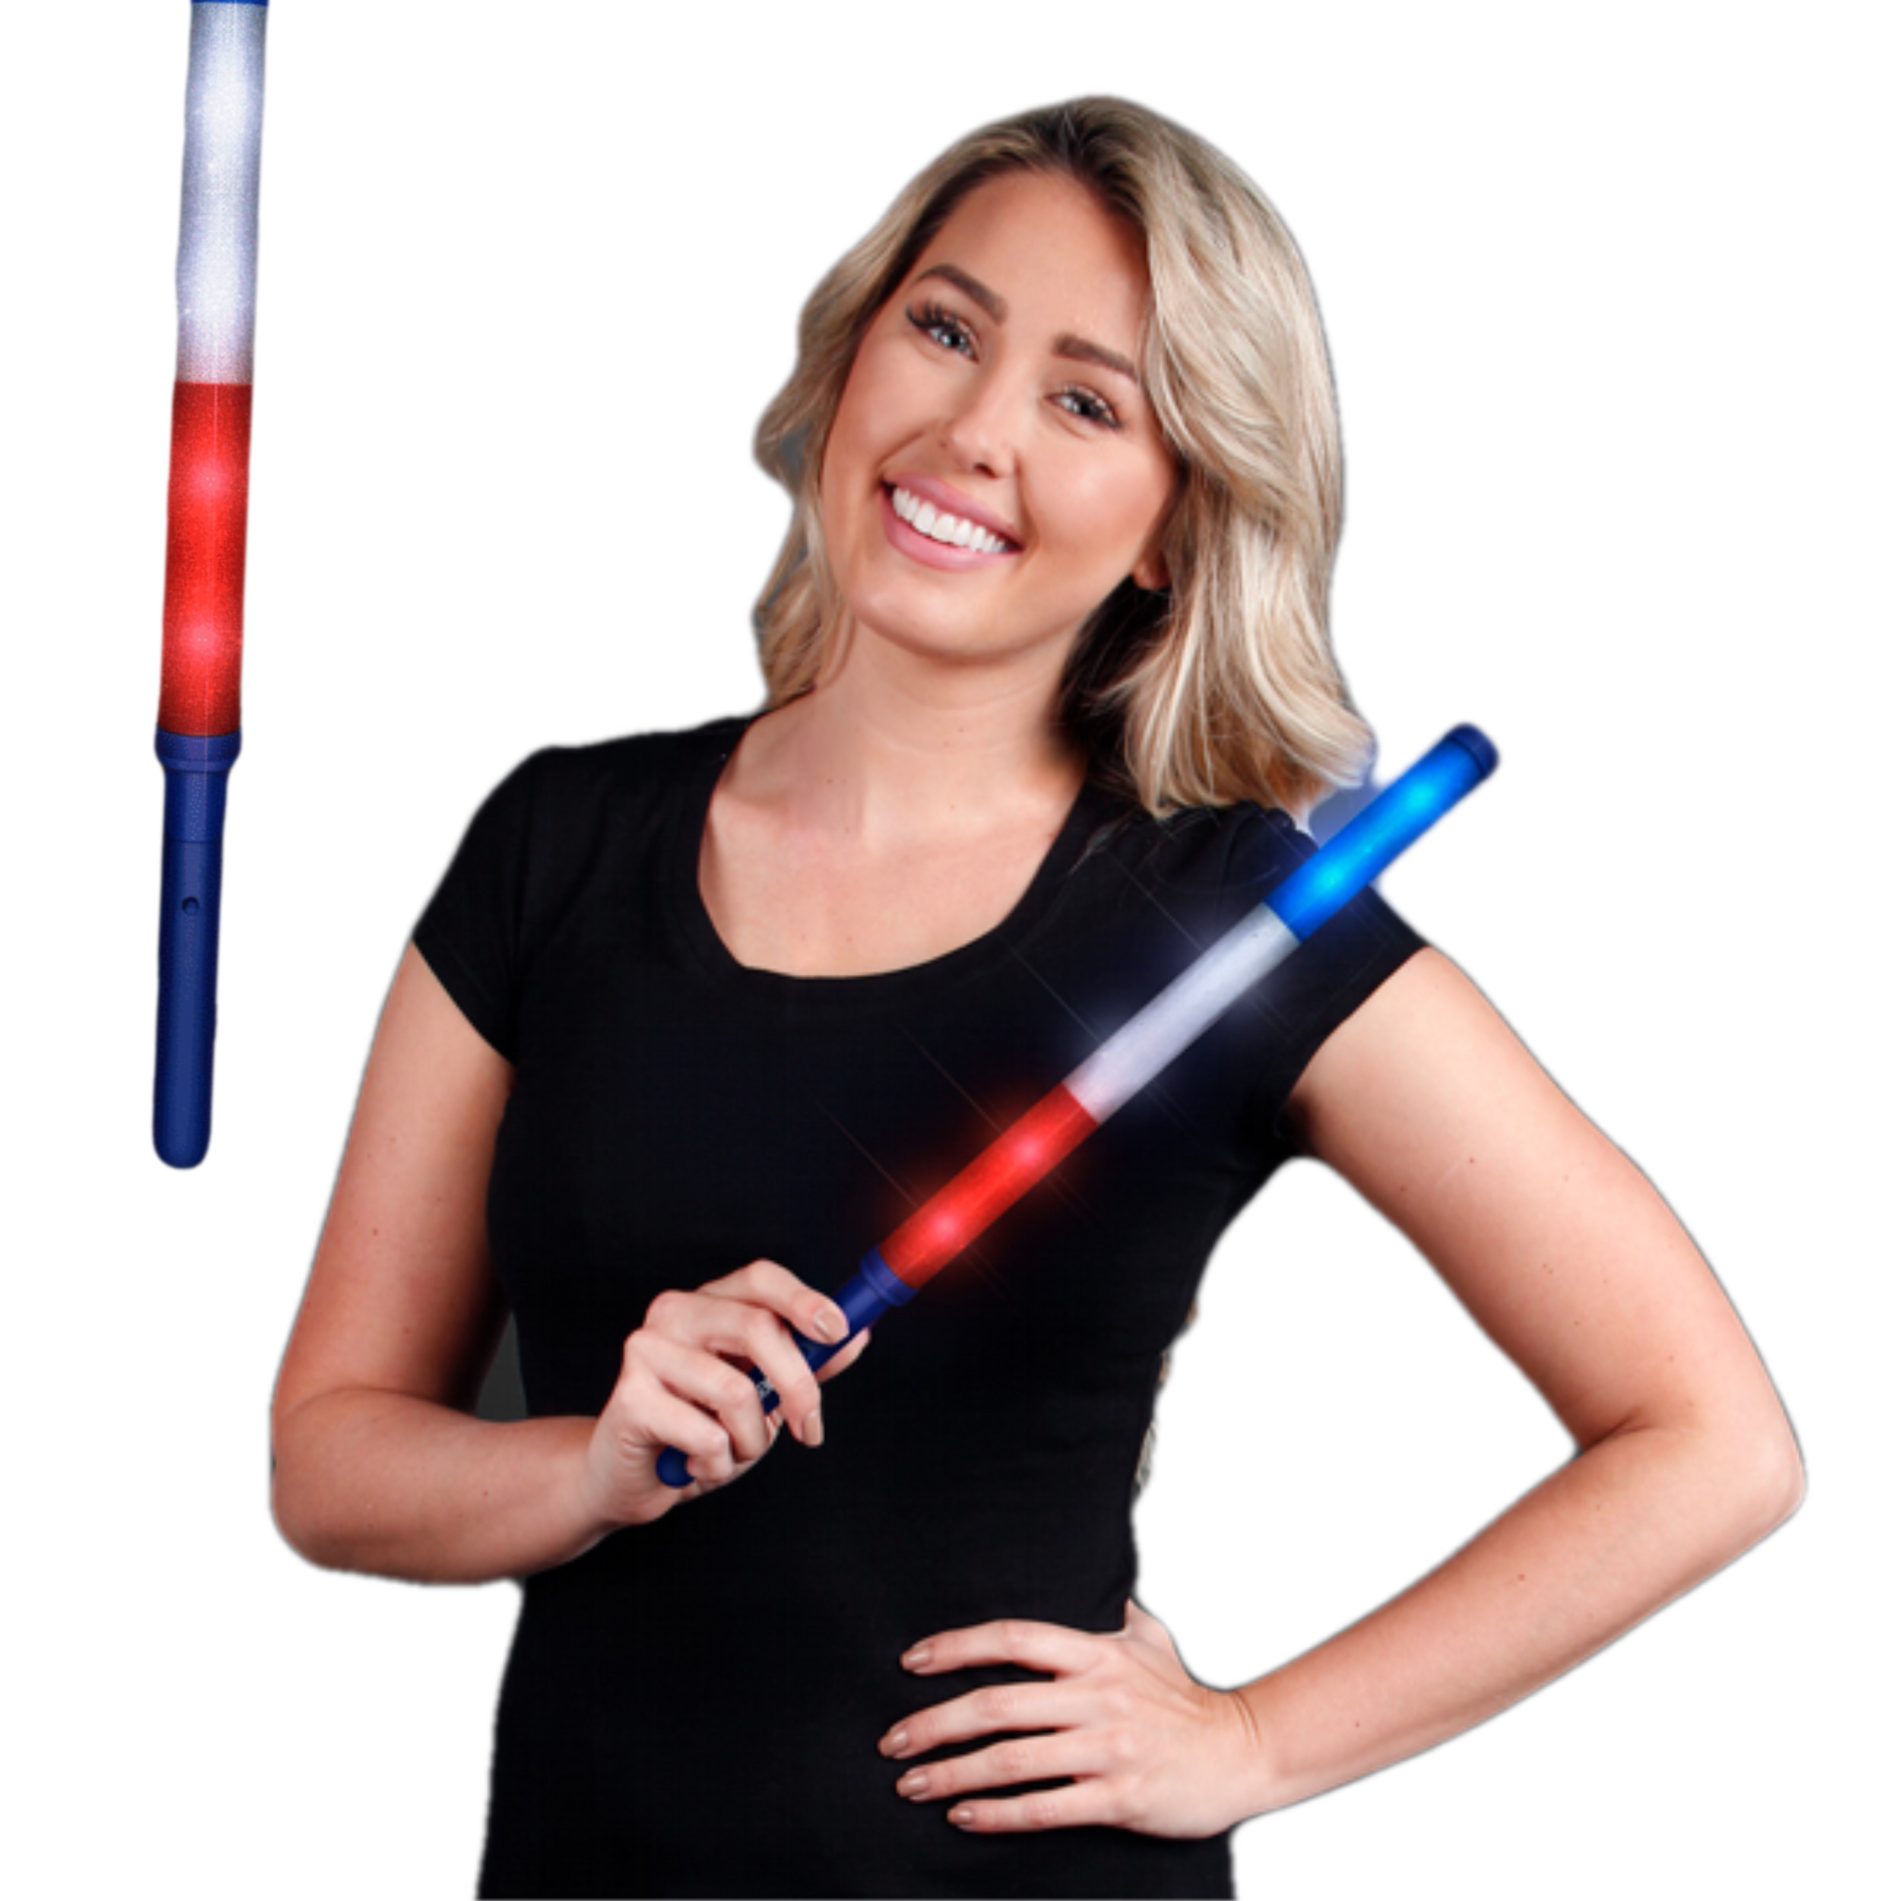 USA Independence Day Red White and Blue Flashing Stick Baton 4th of July 5